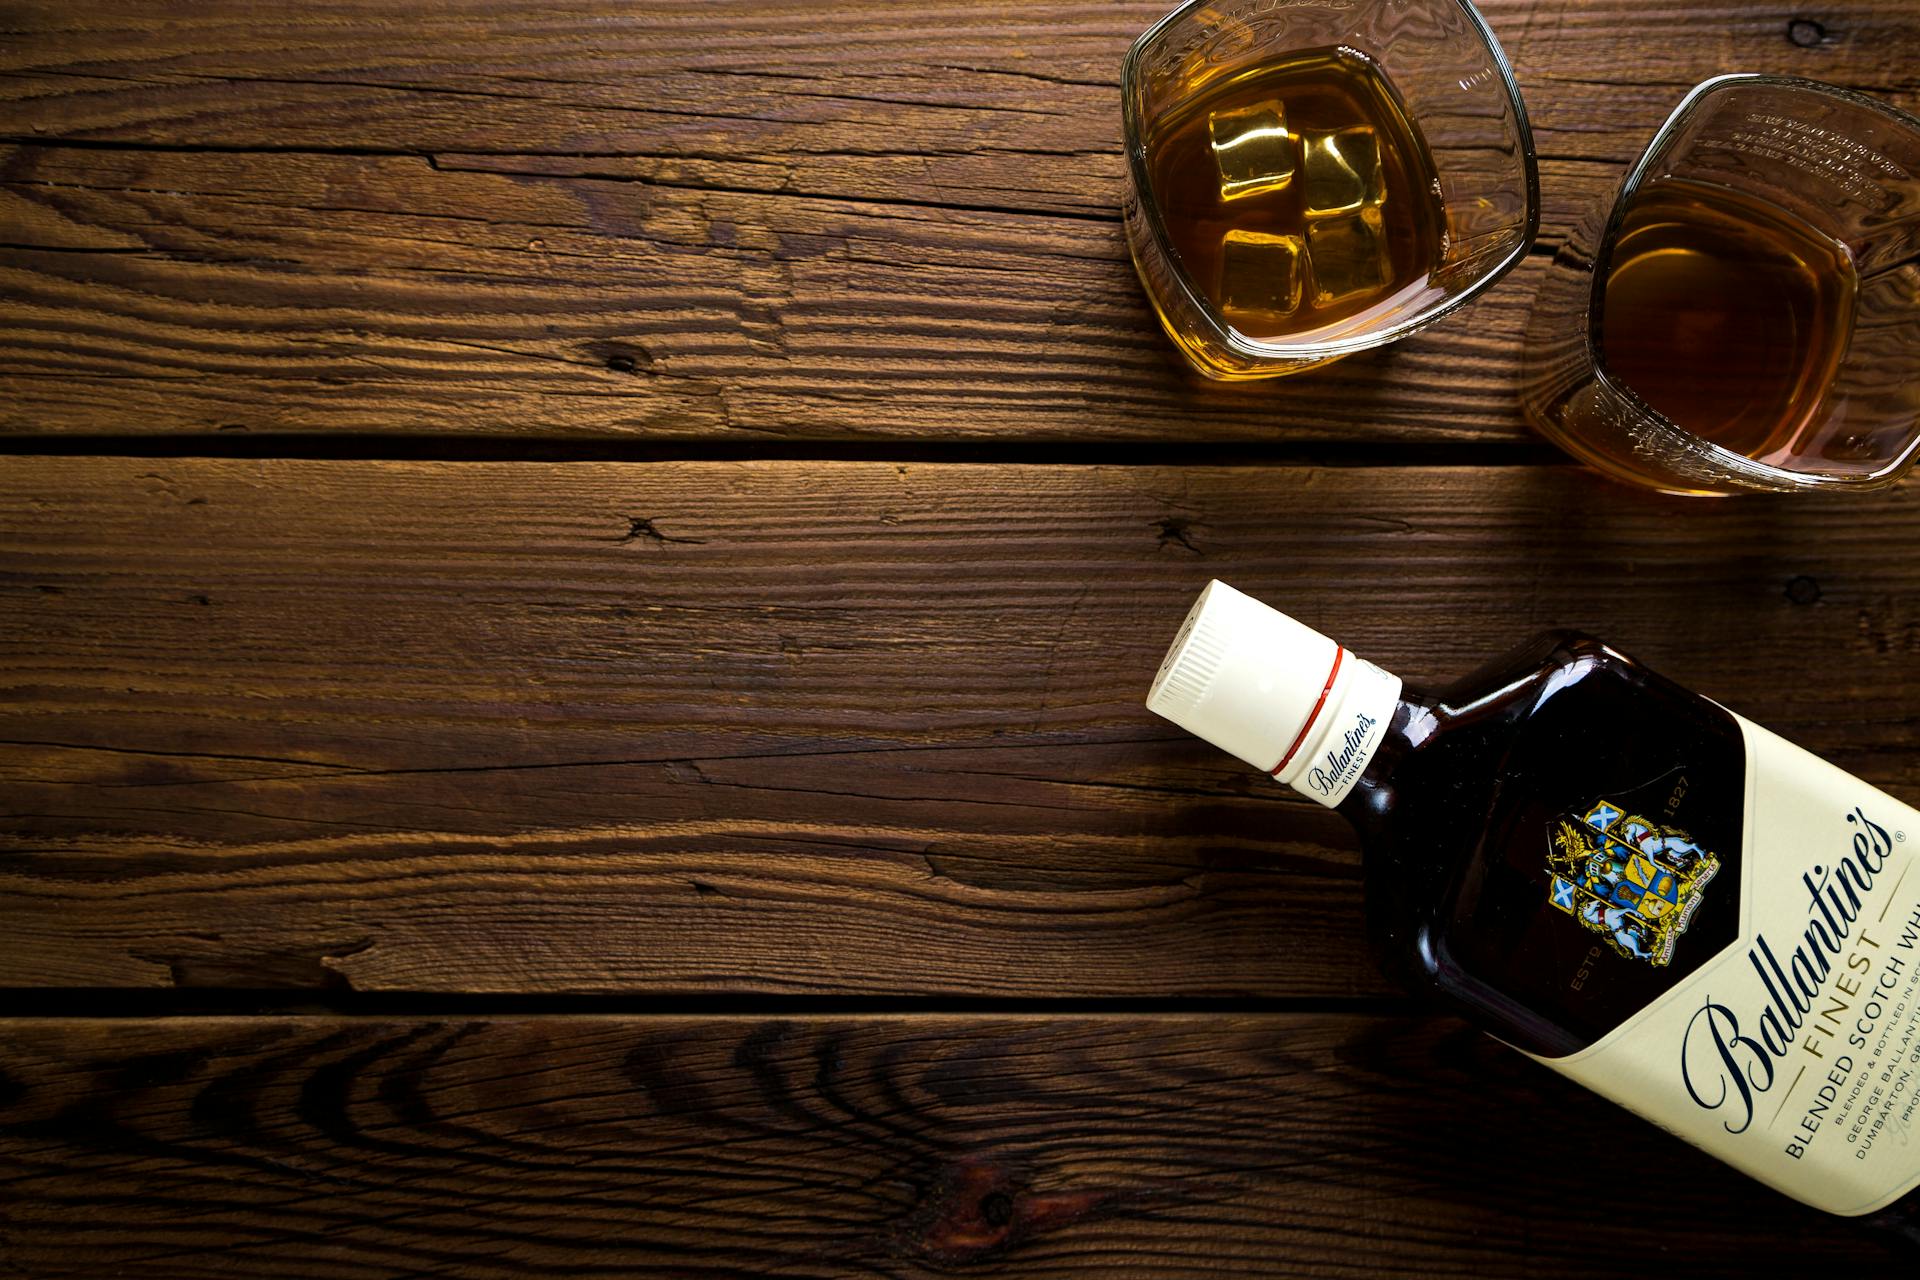 Two glasses and a bottle of alcohol on a table | Source: Pexels